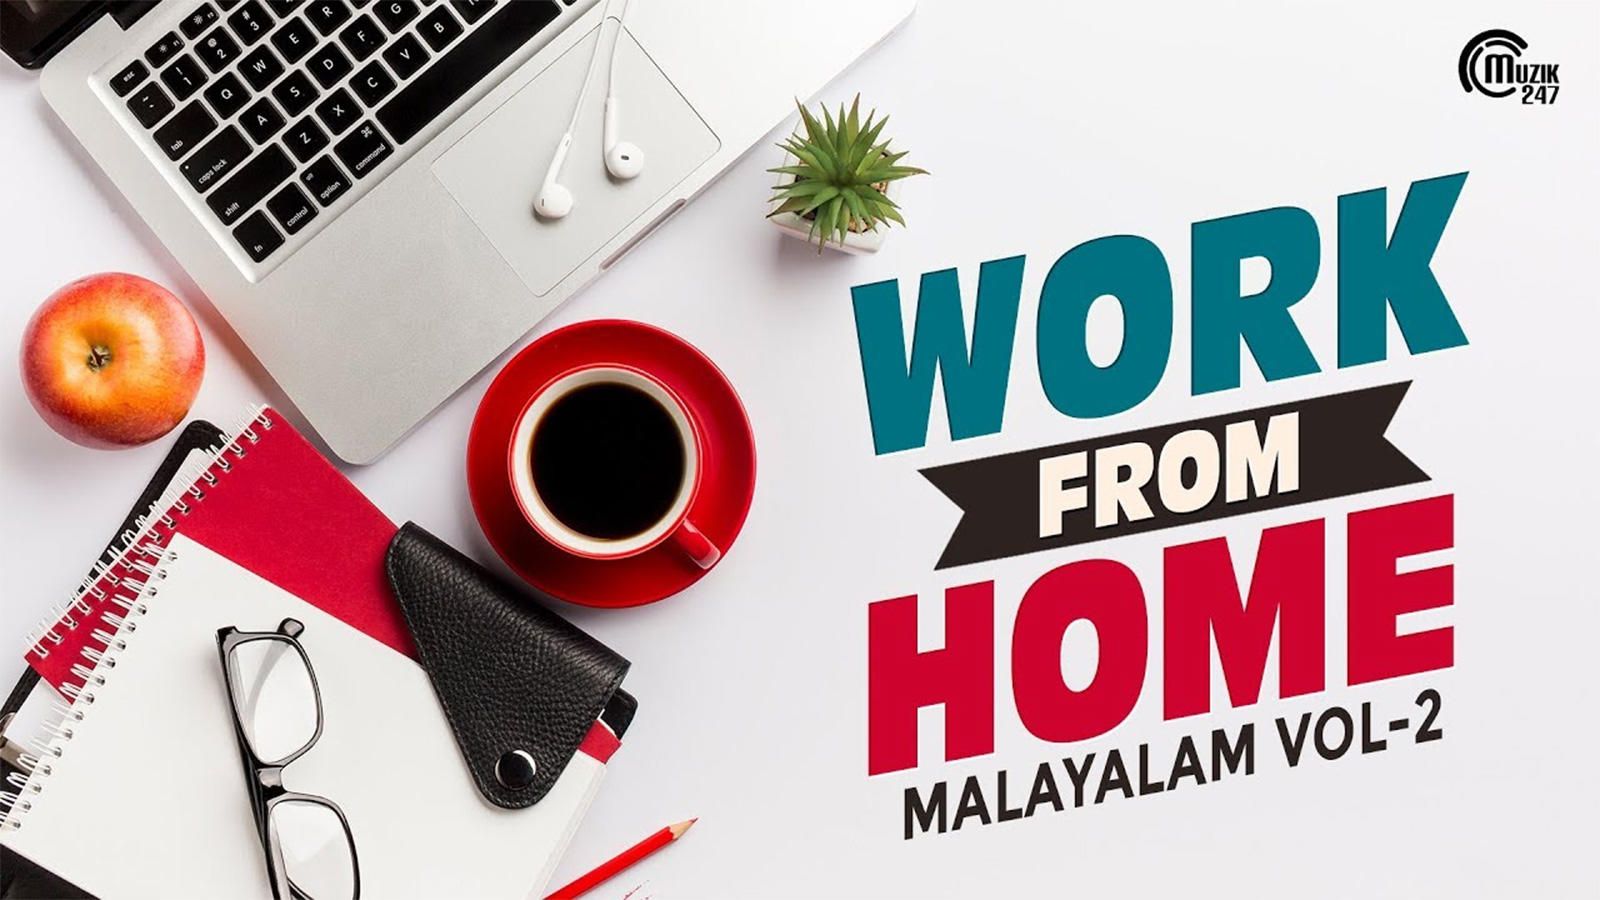 Check Out Latest Malayalam Hit Music Audio Song Jukebox Of 'Work From Home 2'. Malayalam Video Songs of India